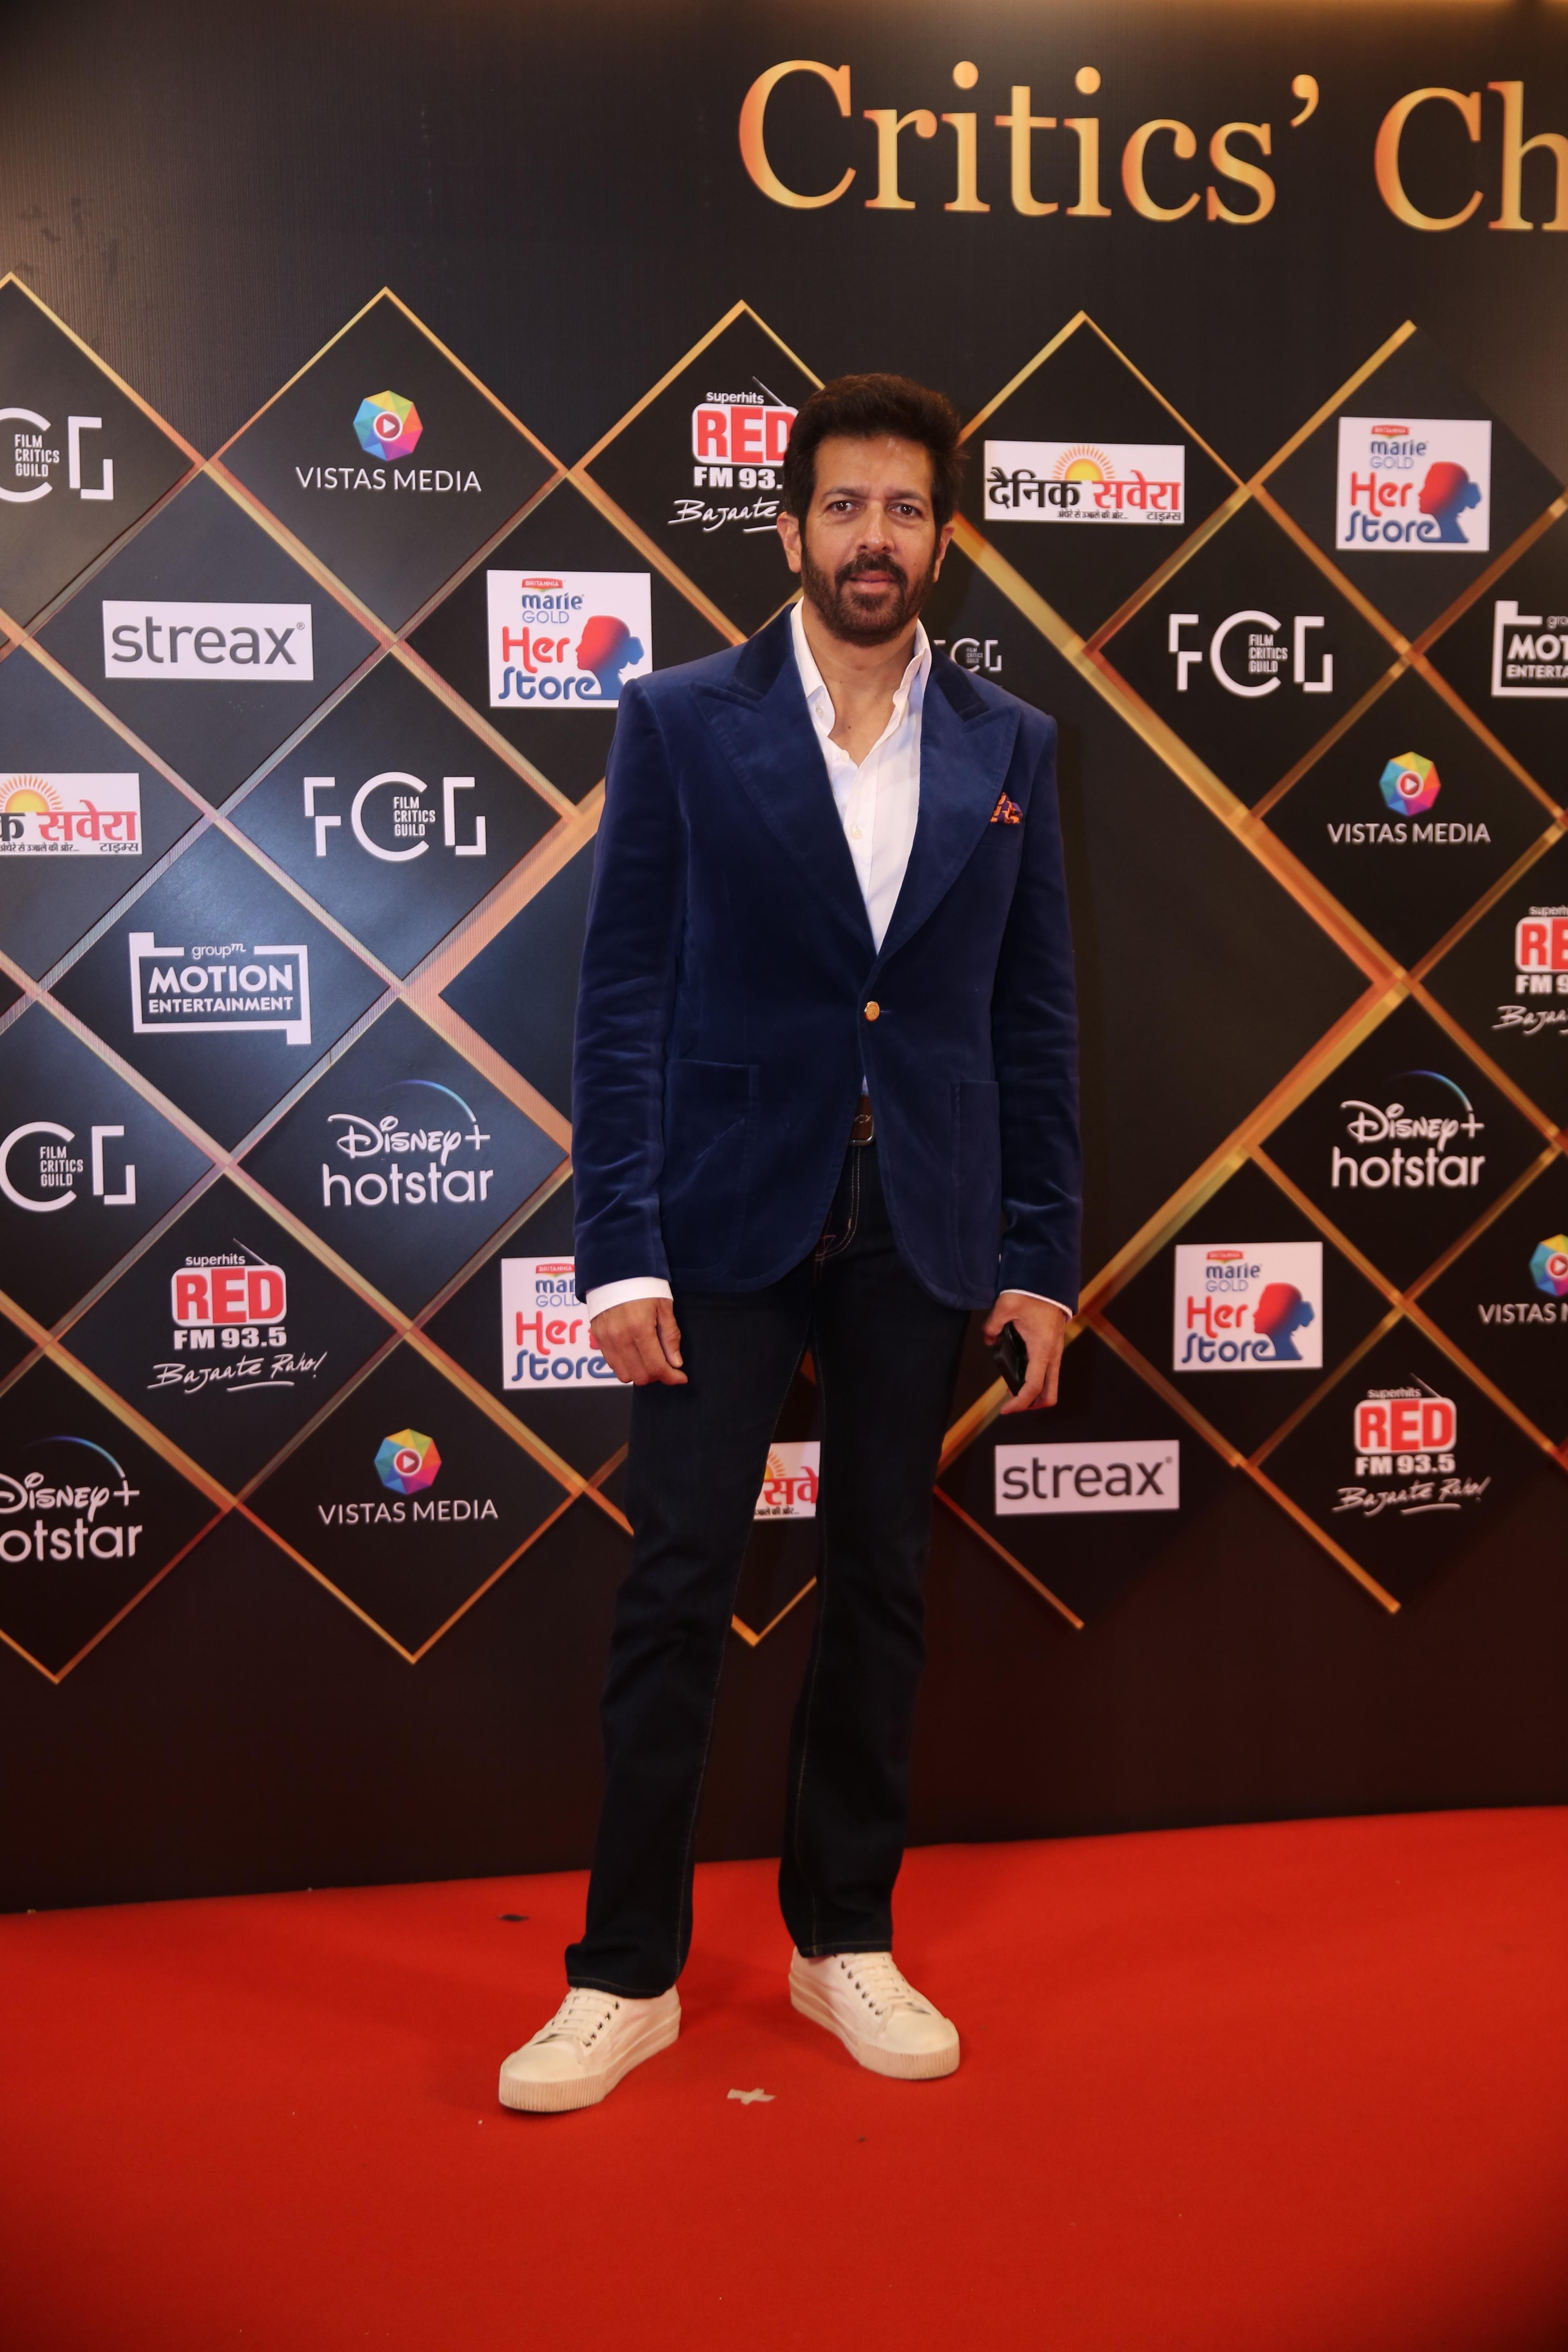 Kabir Khan rocked the red carpet in his striking blue suit at the CCA Awards red carpet